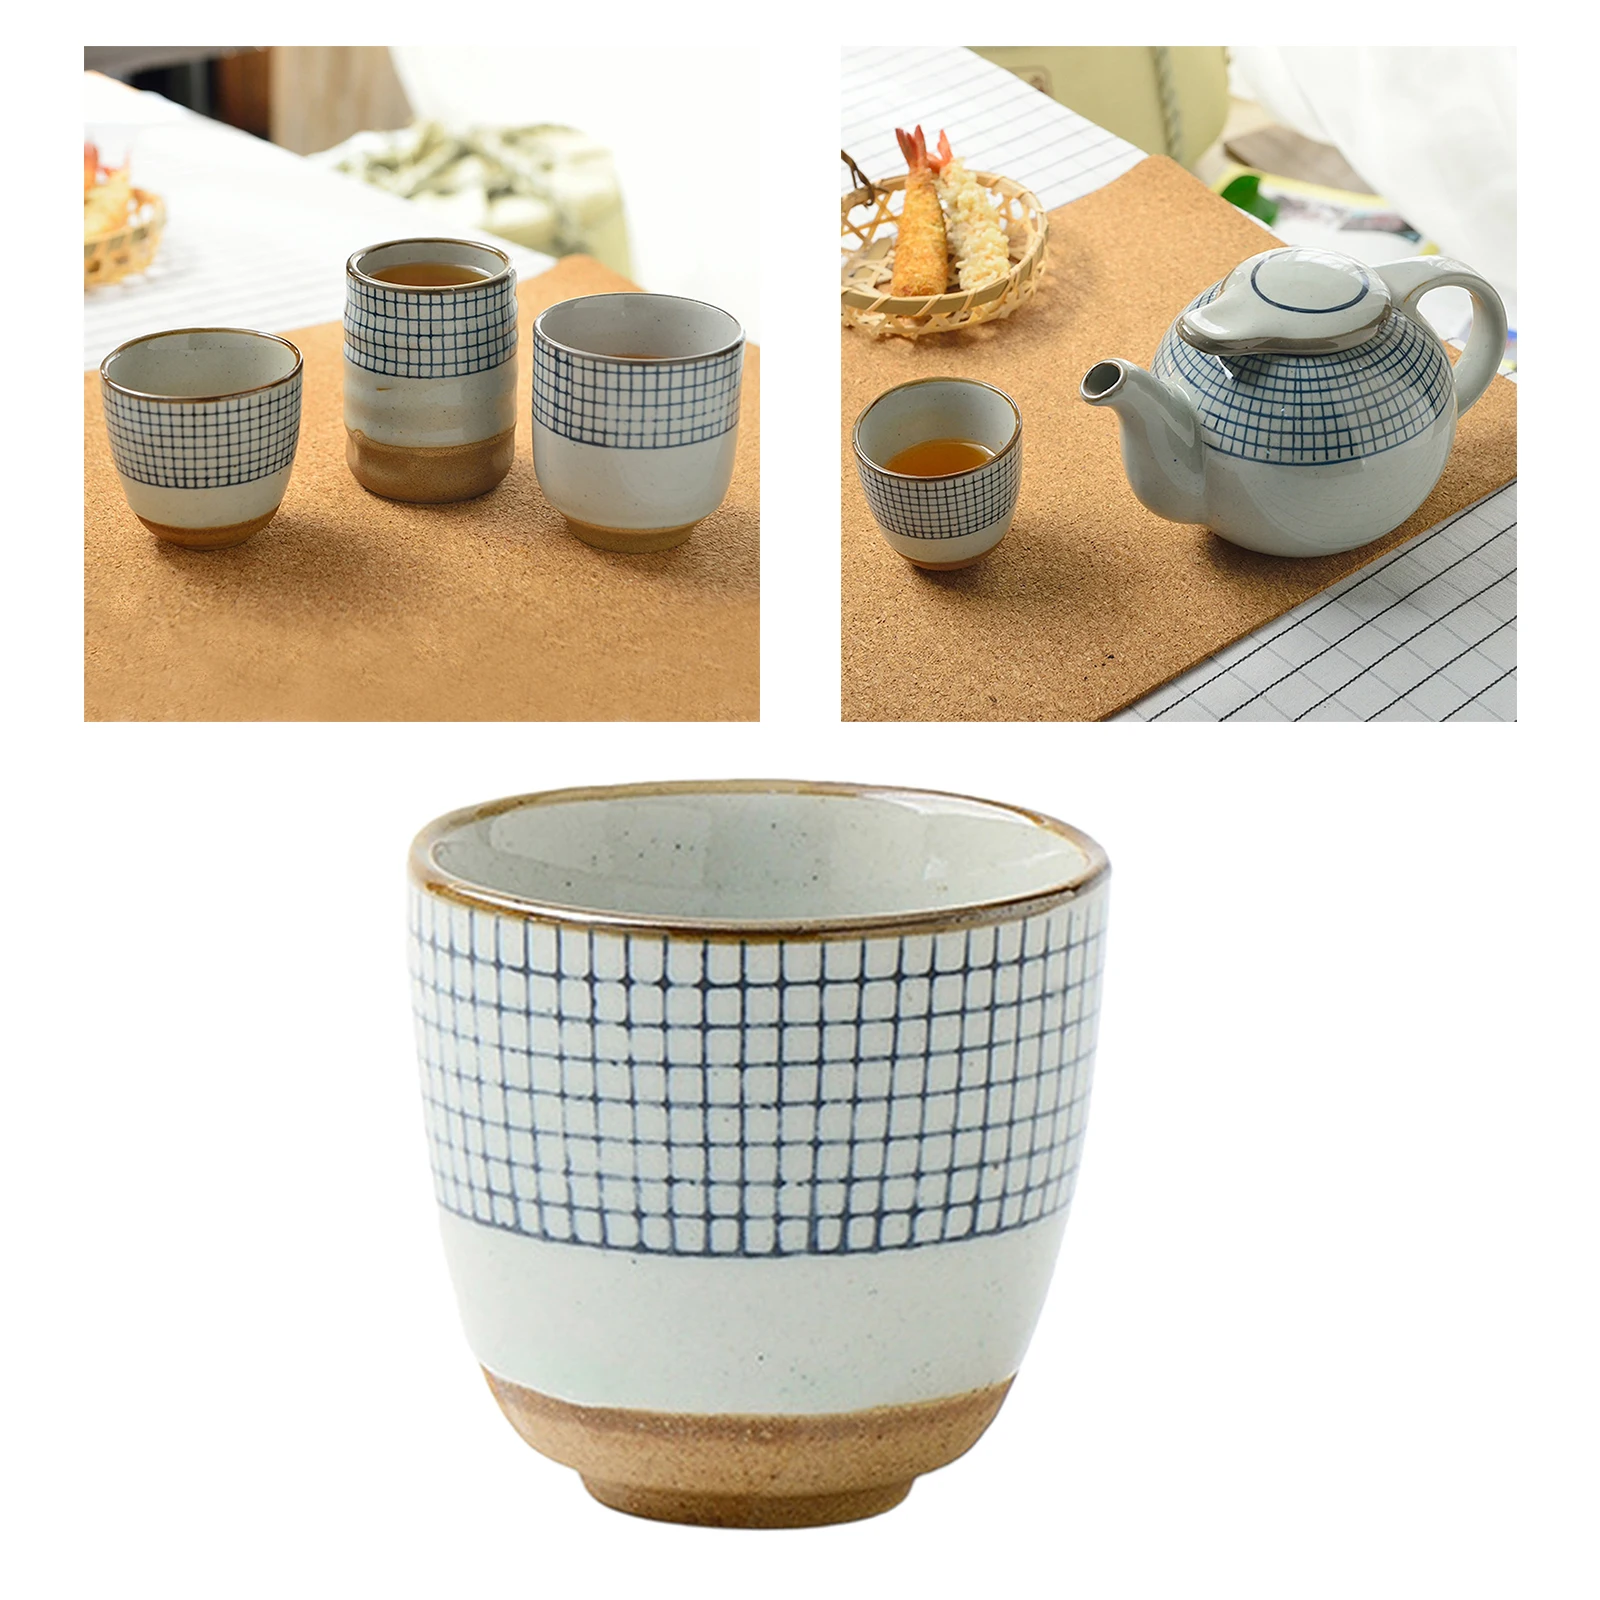 Traditional Japanese Yunomi Tea Cup for Loose Tea Handpainted Pottery Tea Cup Artistic